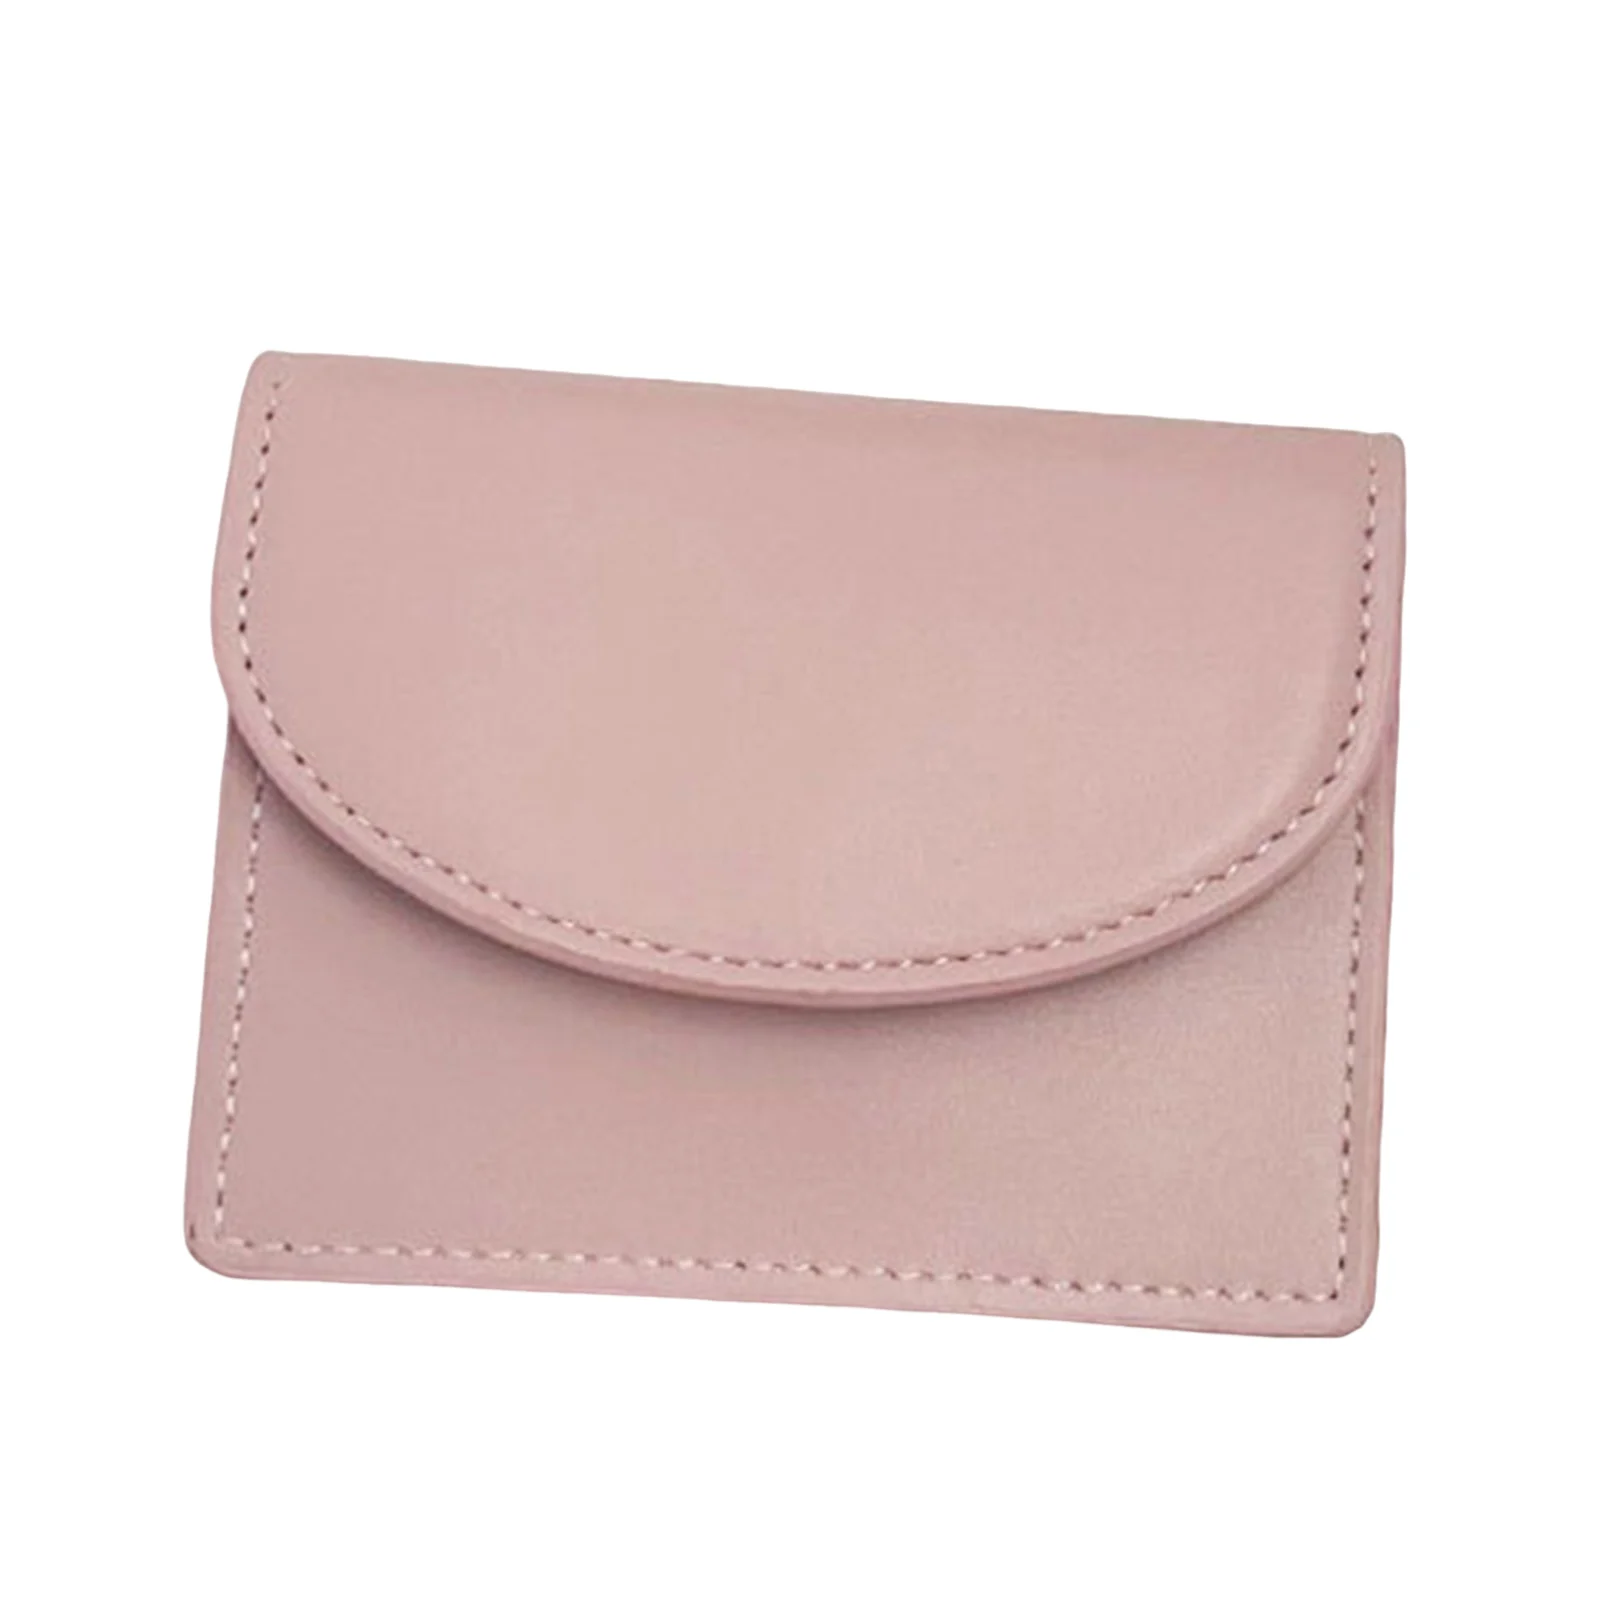 

PU Wallet Student Purse Multi-purpose Compact Card Holder Organizer for Money Business Cards Coins